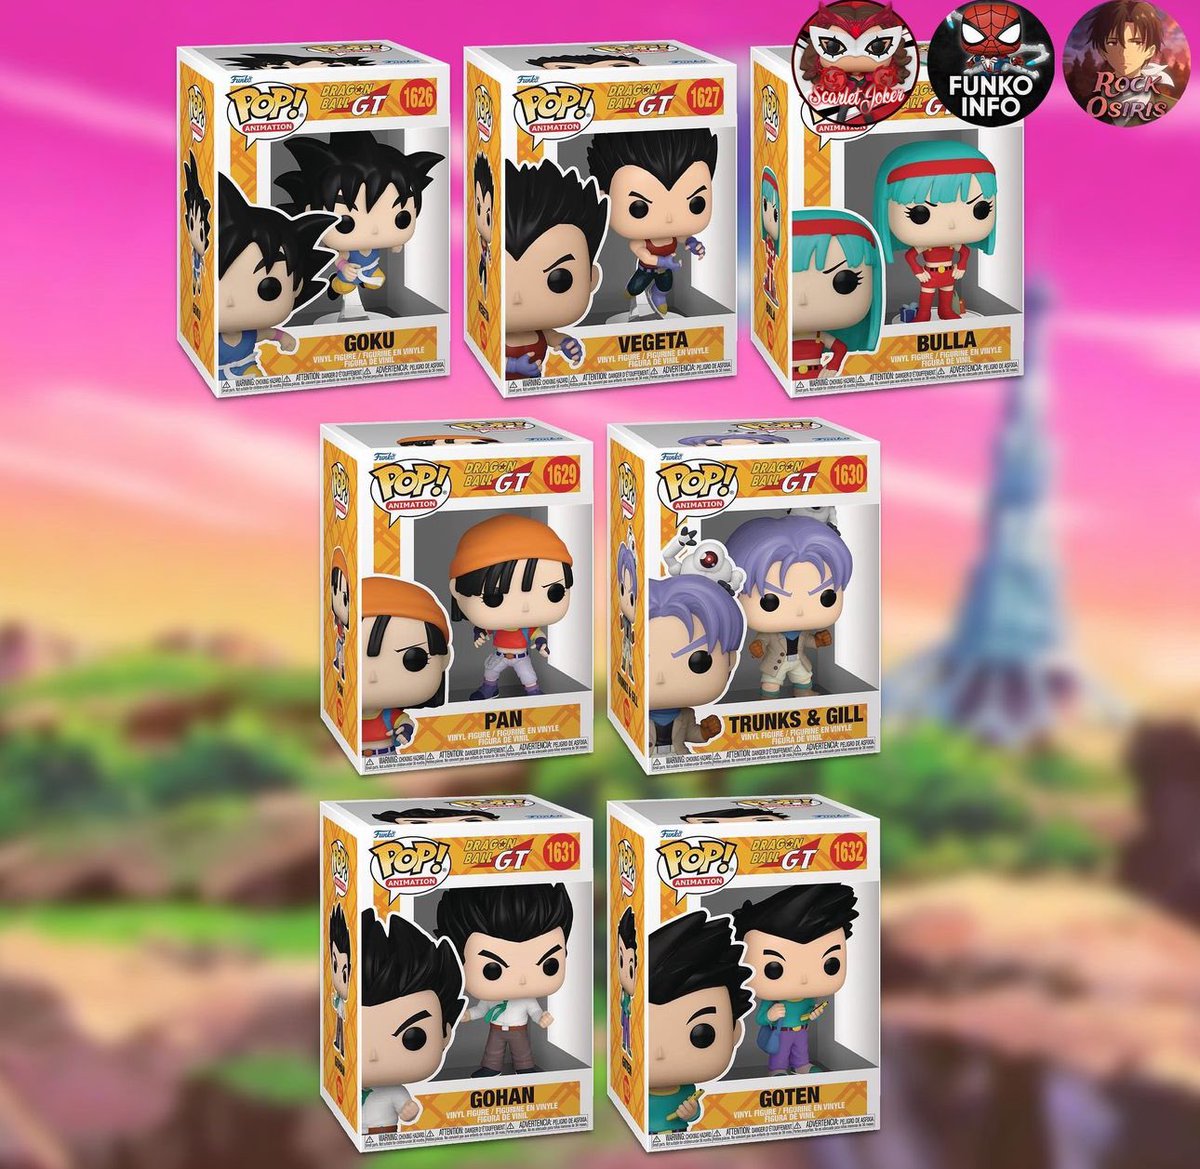 First look at Dragon Ball GT Pops!
.
Credit @rockosiris_
#DragonBall #DragonBallGT #Funko #FunkoPop #FunkoPopVinyl #Pop #PopVinyl #Collectibles #Collectible #FunkoCollector #FunkoPops #Collector #Toy #Toys #DisTrackers